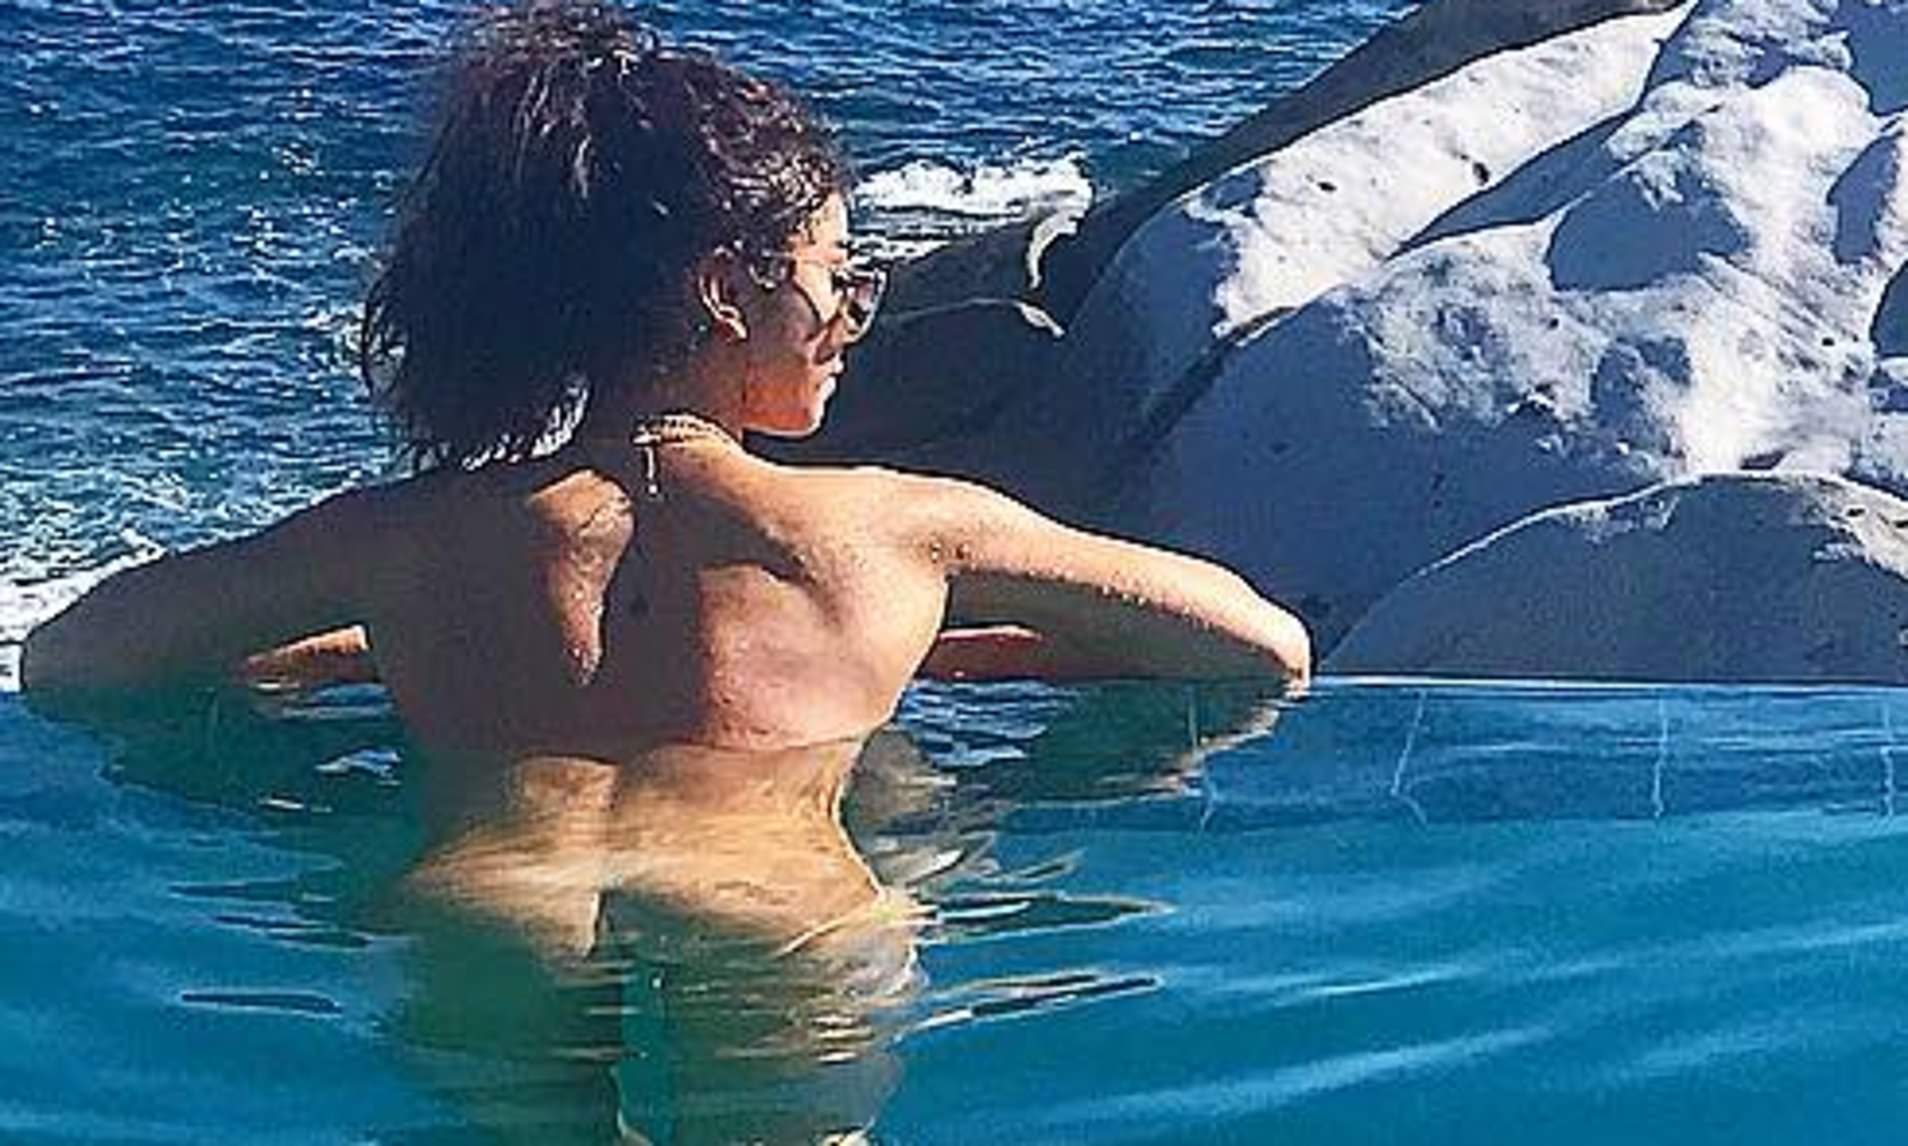 Sarah Hyland gets cheeky as she goes skinny dipping on romantic vacation  with boyfriend Wells Adam | Daily Mail Online